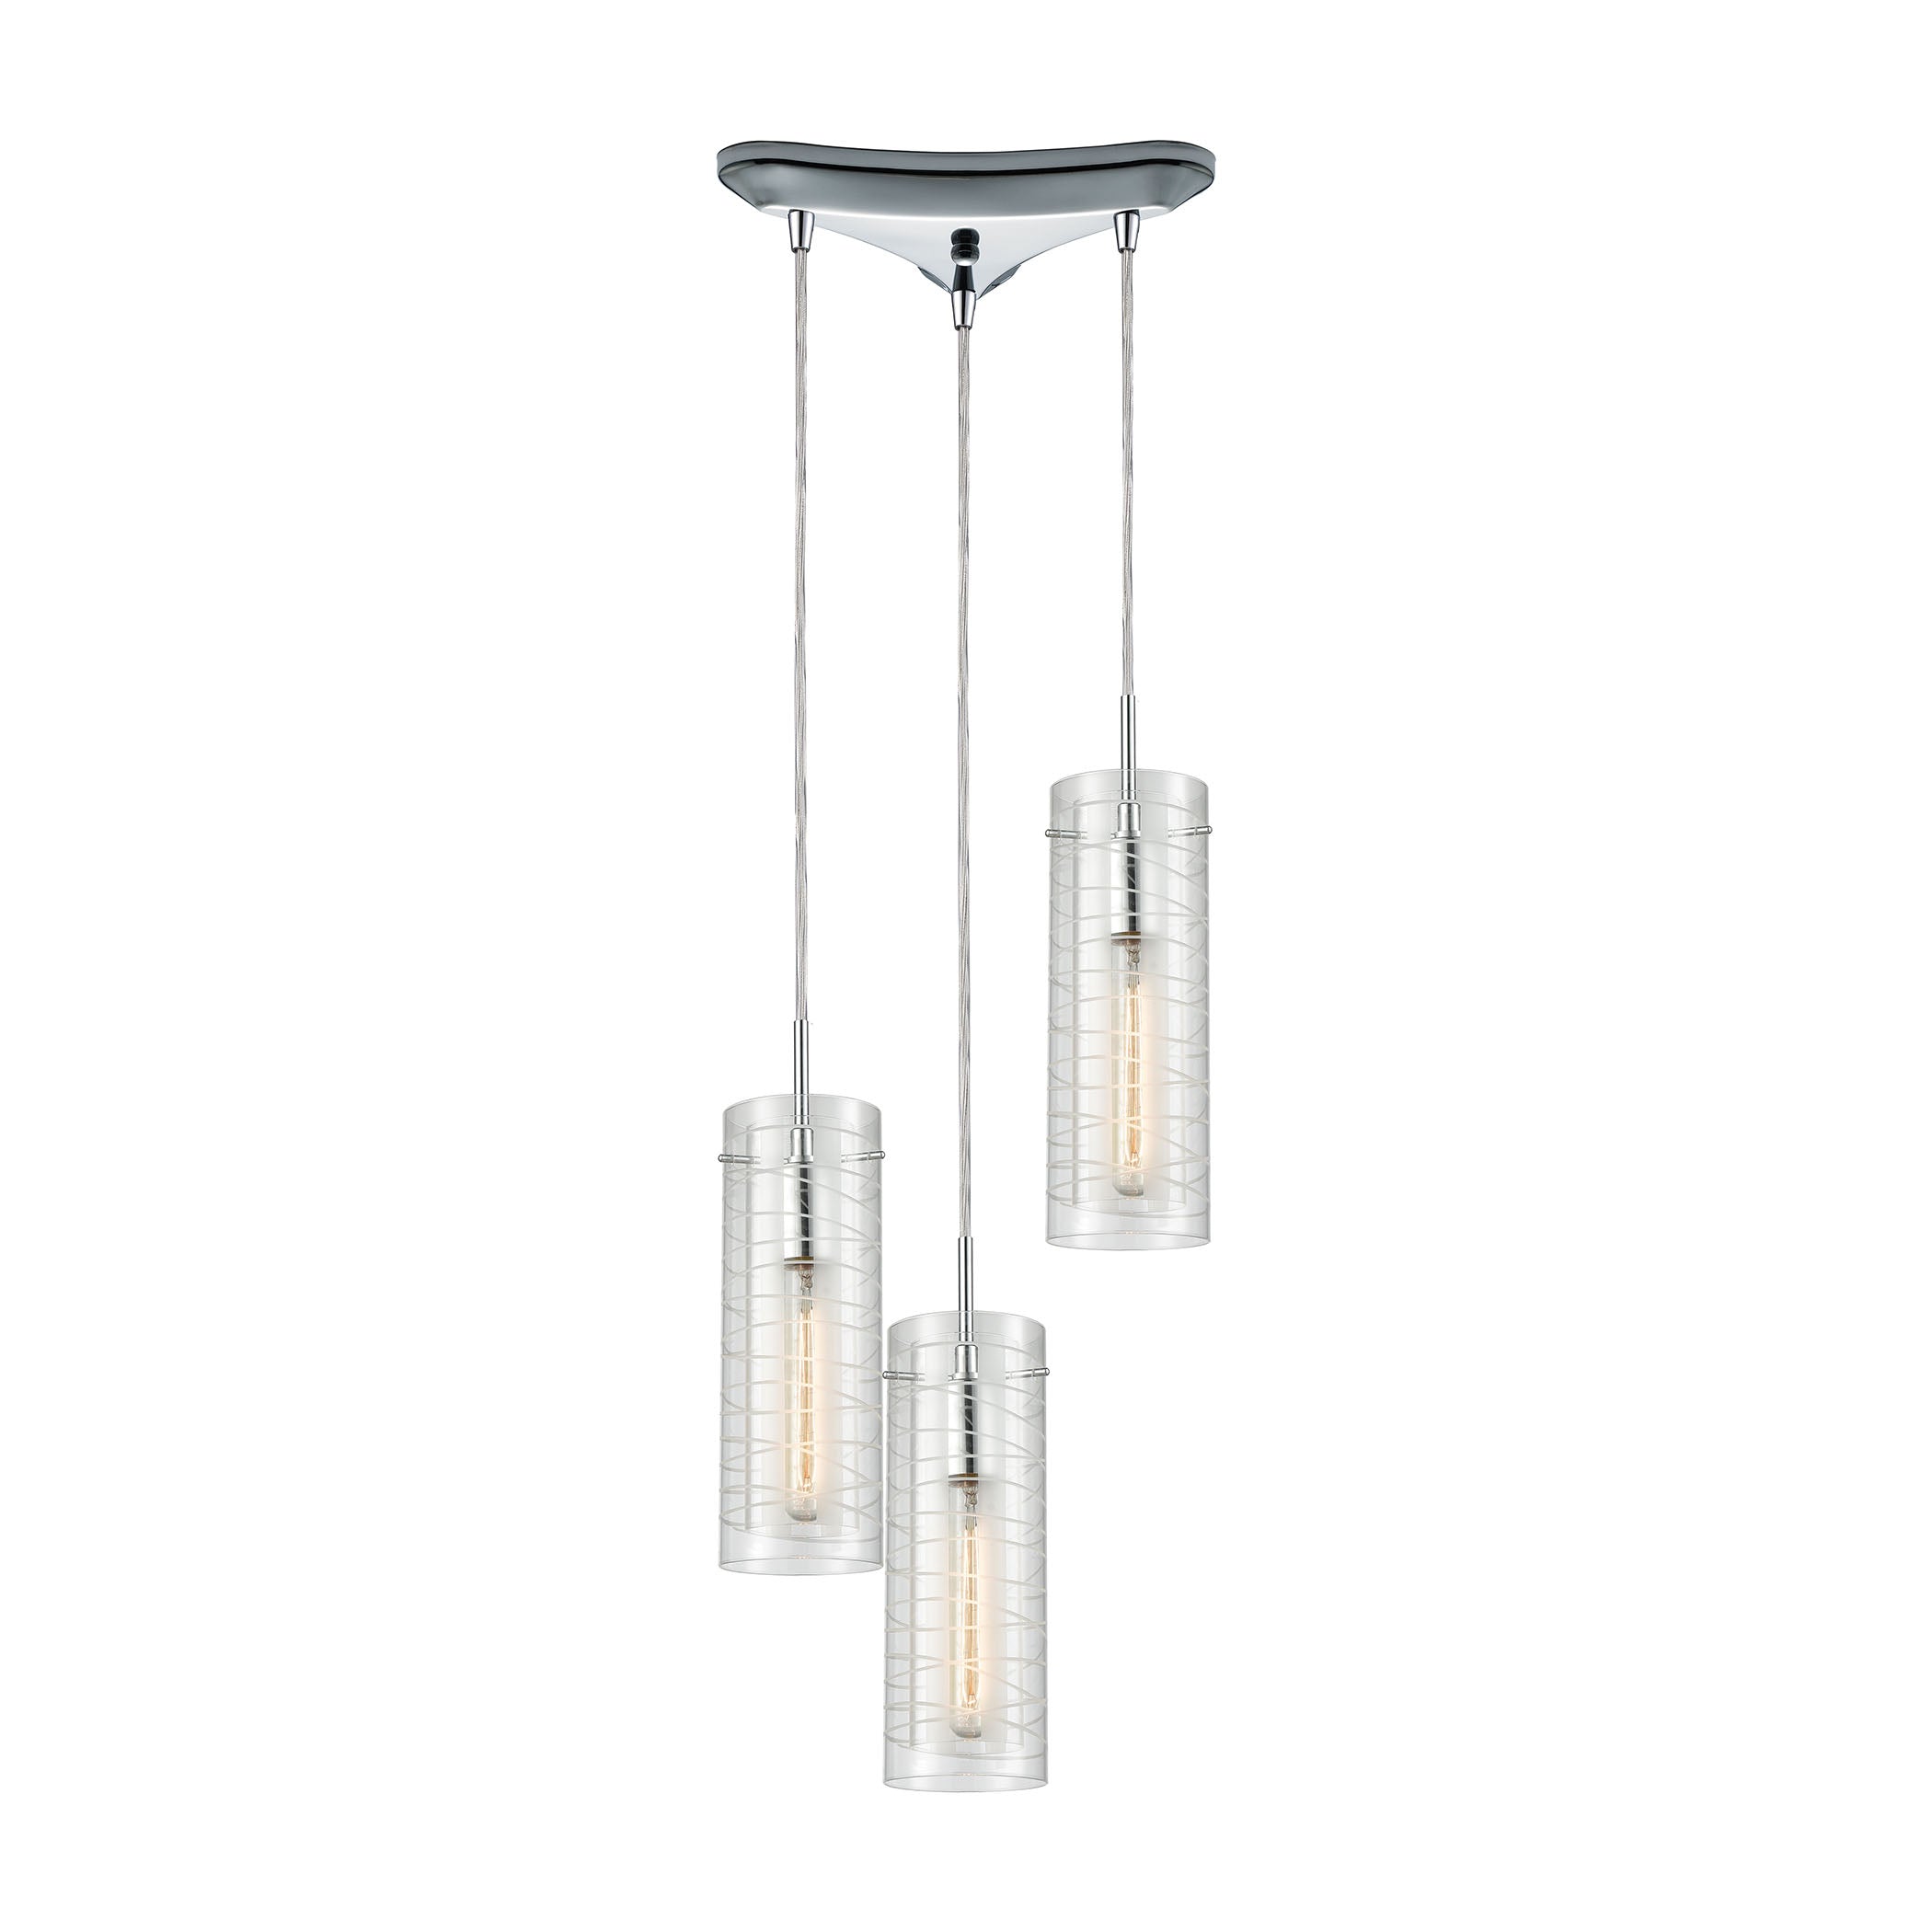 ELK Lighting 56595/3 Swirl 3-Light Triangular Pendant Fixture in Polished Chrome with Clear Etched Glass